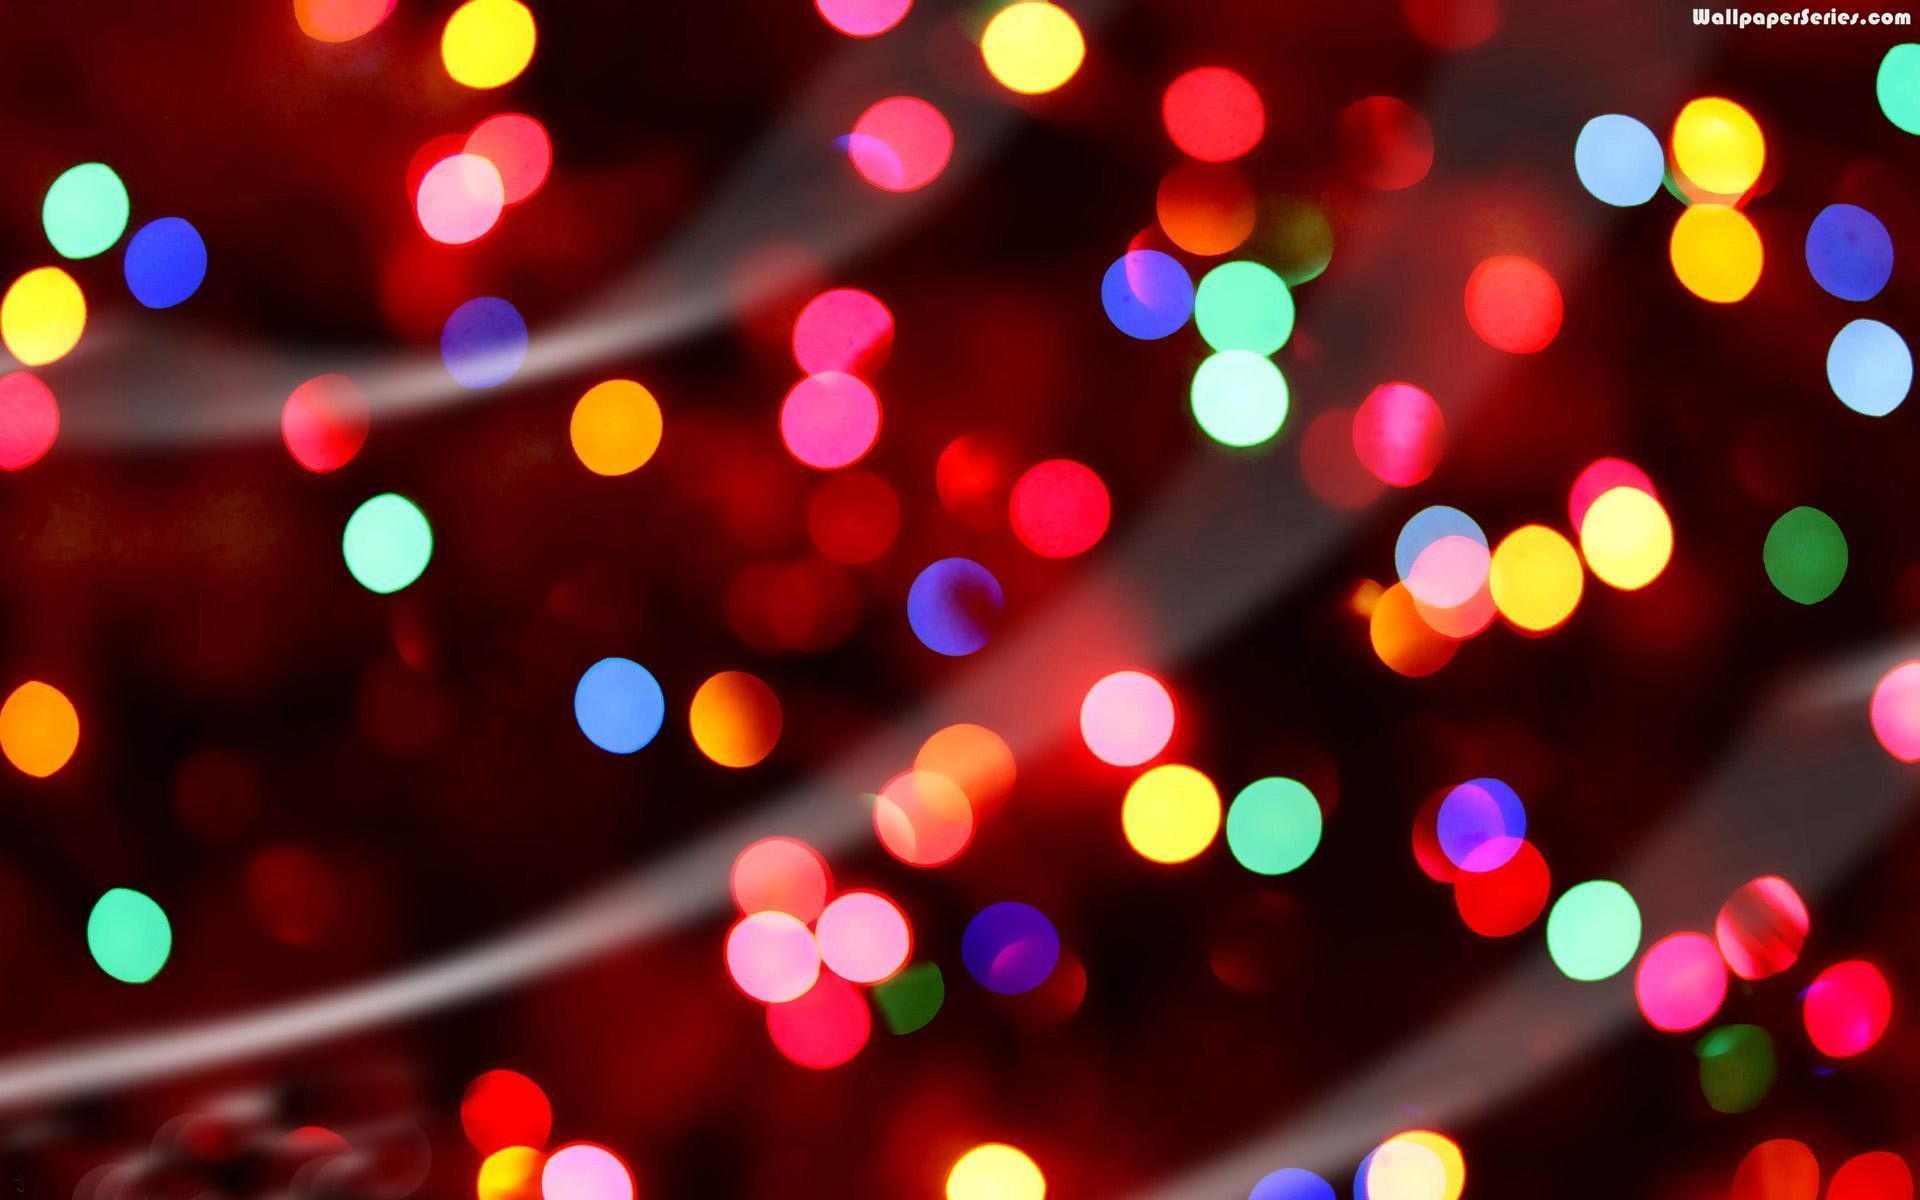 Top 10 christmas lights wallpapers and backgrounds for Desktop ...